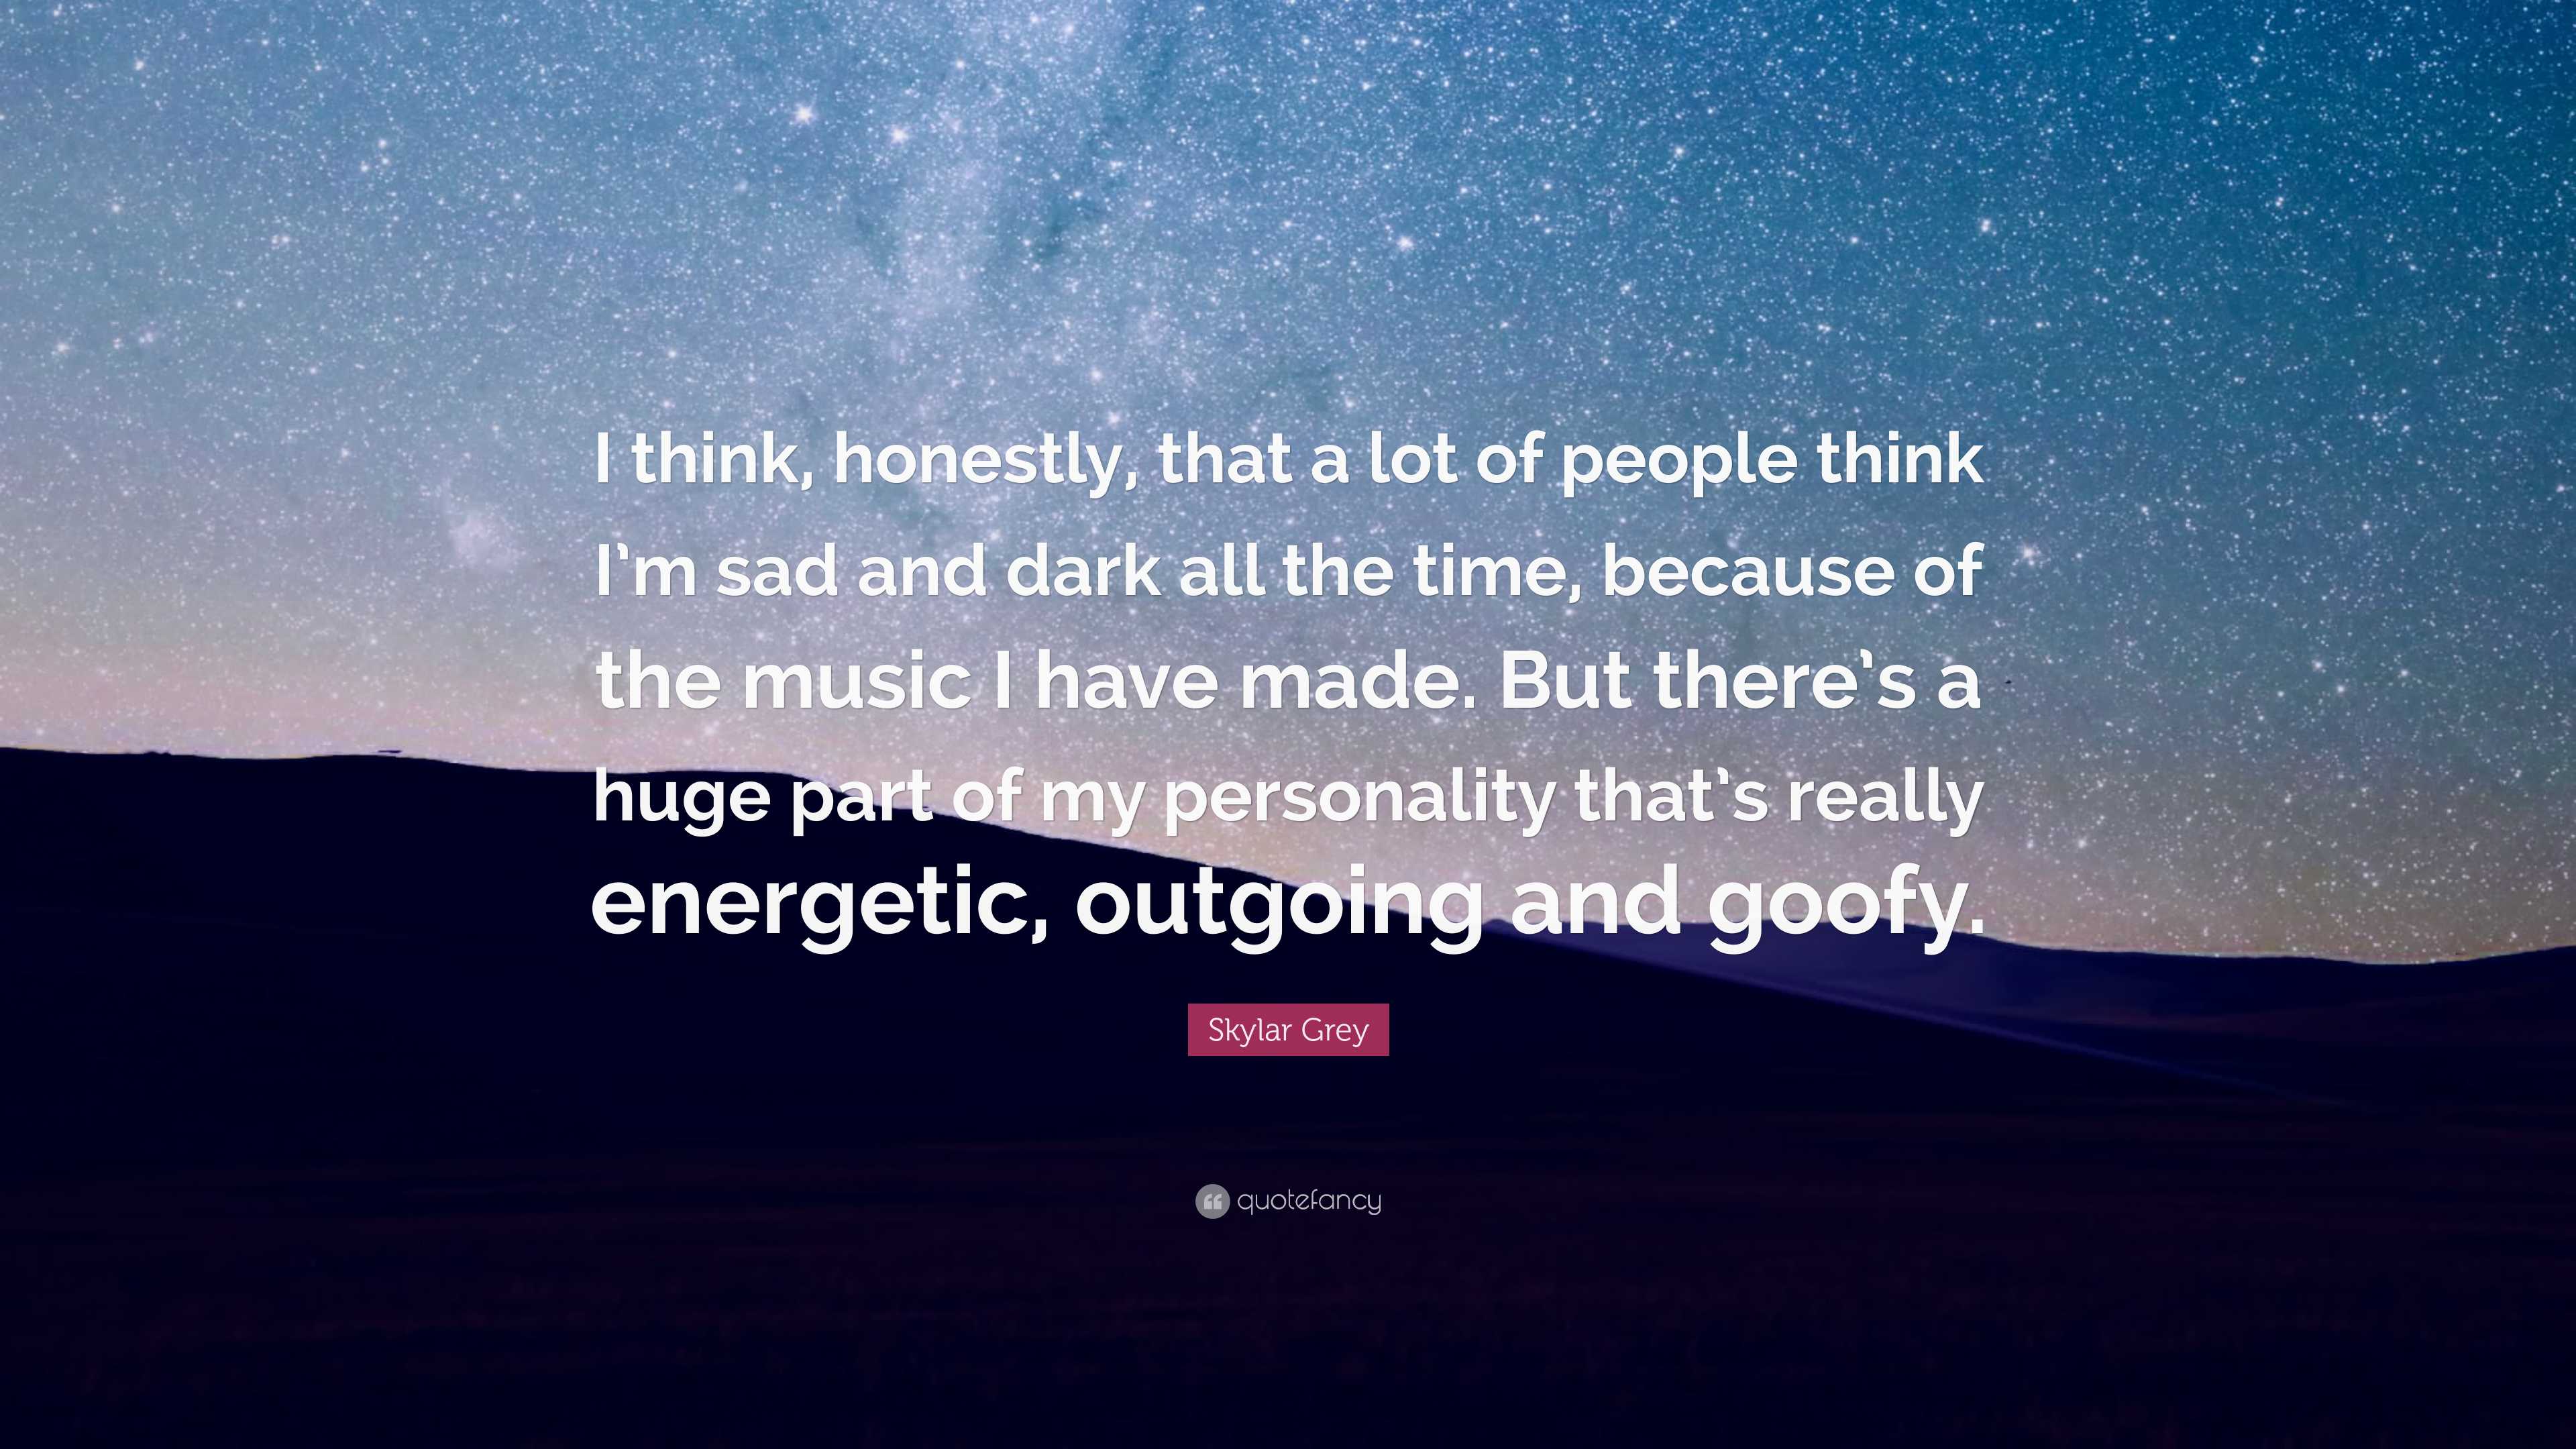 https://quotefancy.com/media/wallpaper/3840x2160/8021178-Skylar-Grey-Quote-I-think-honestly-that-a-lot-of-people-think-I-m.jpg